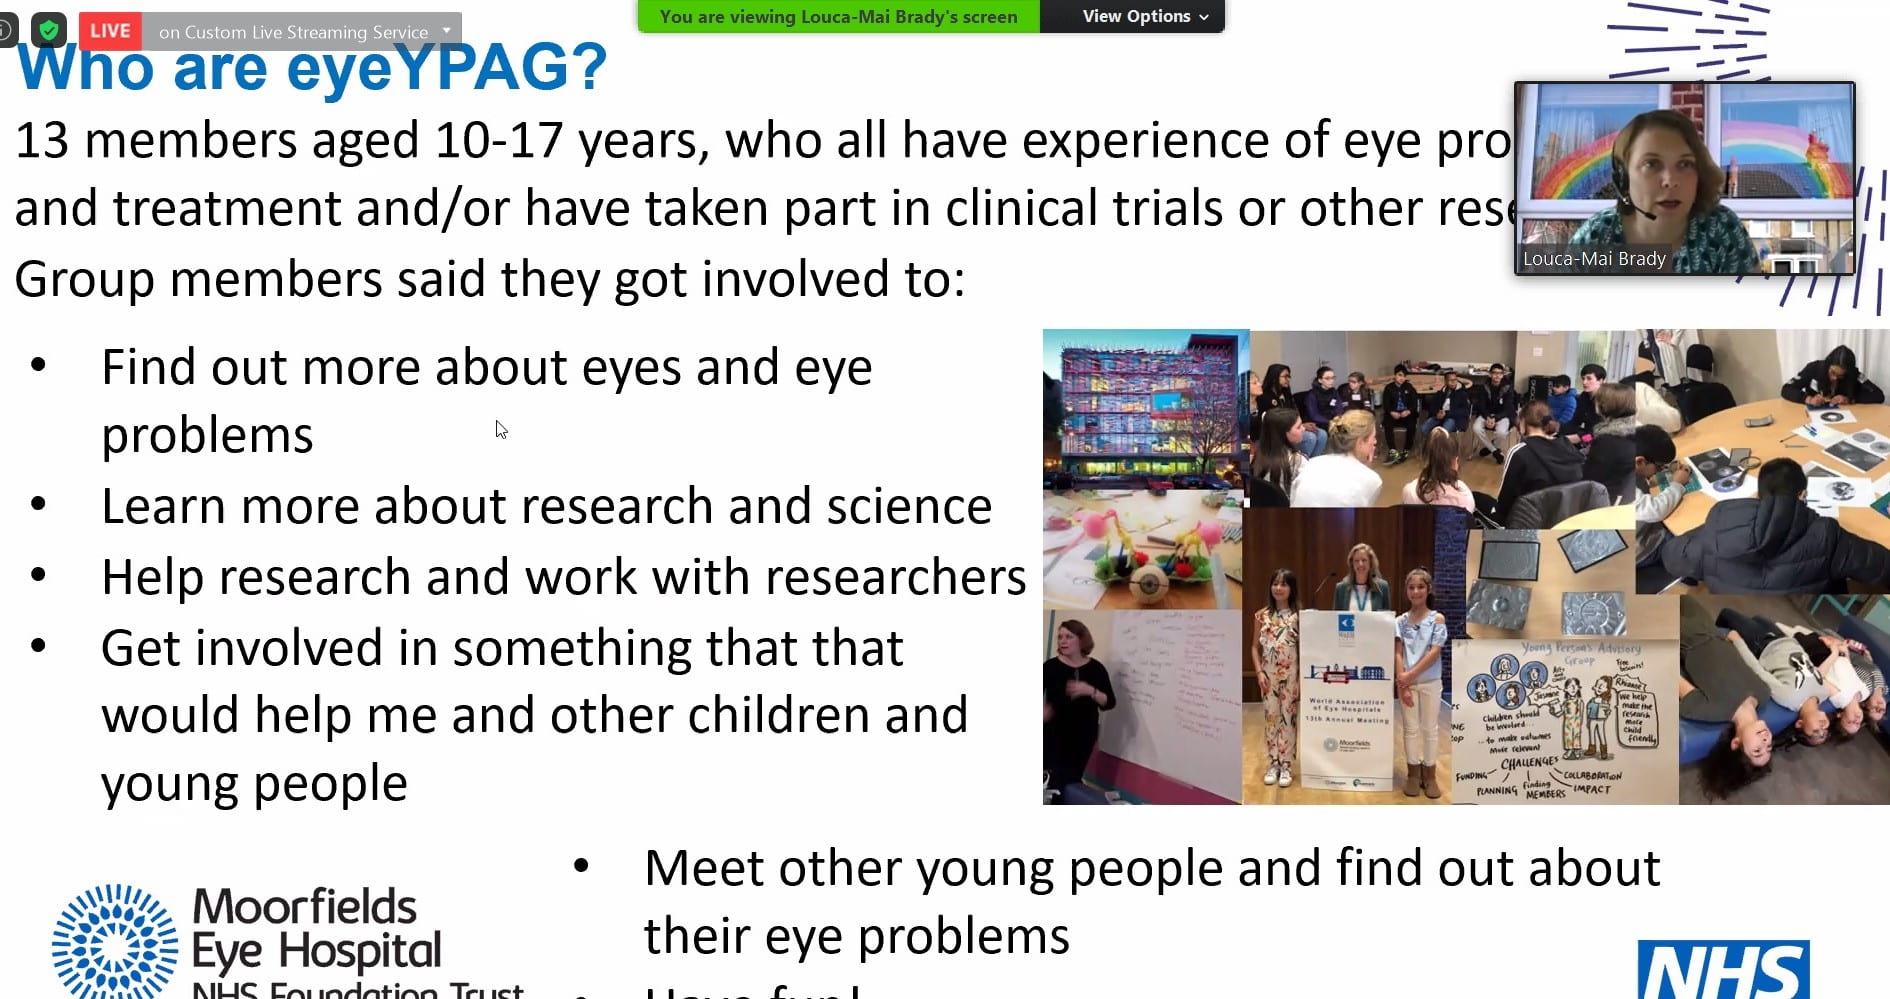 Image of a slide with reasons why eyeYPAG members get involved - to learn about science, help research, meet people